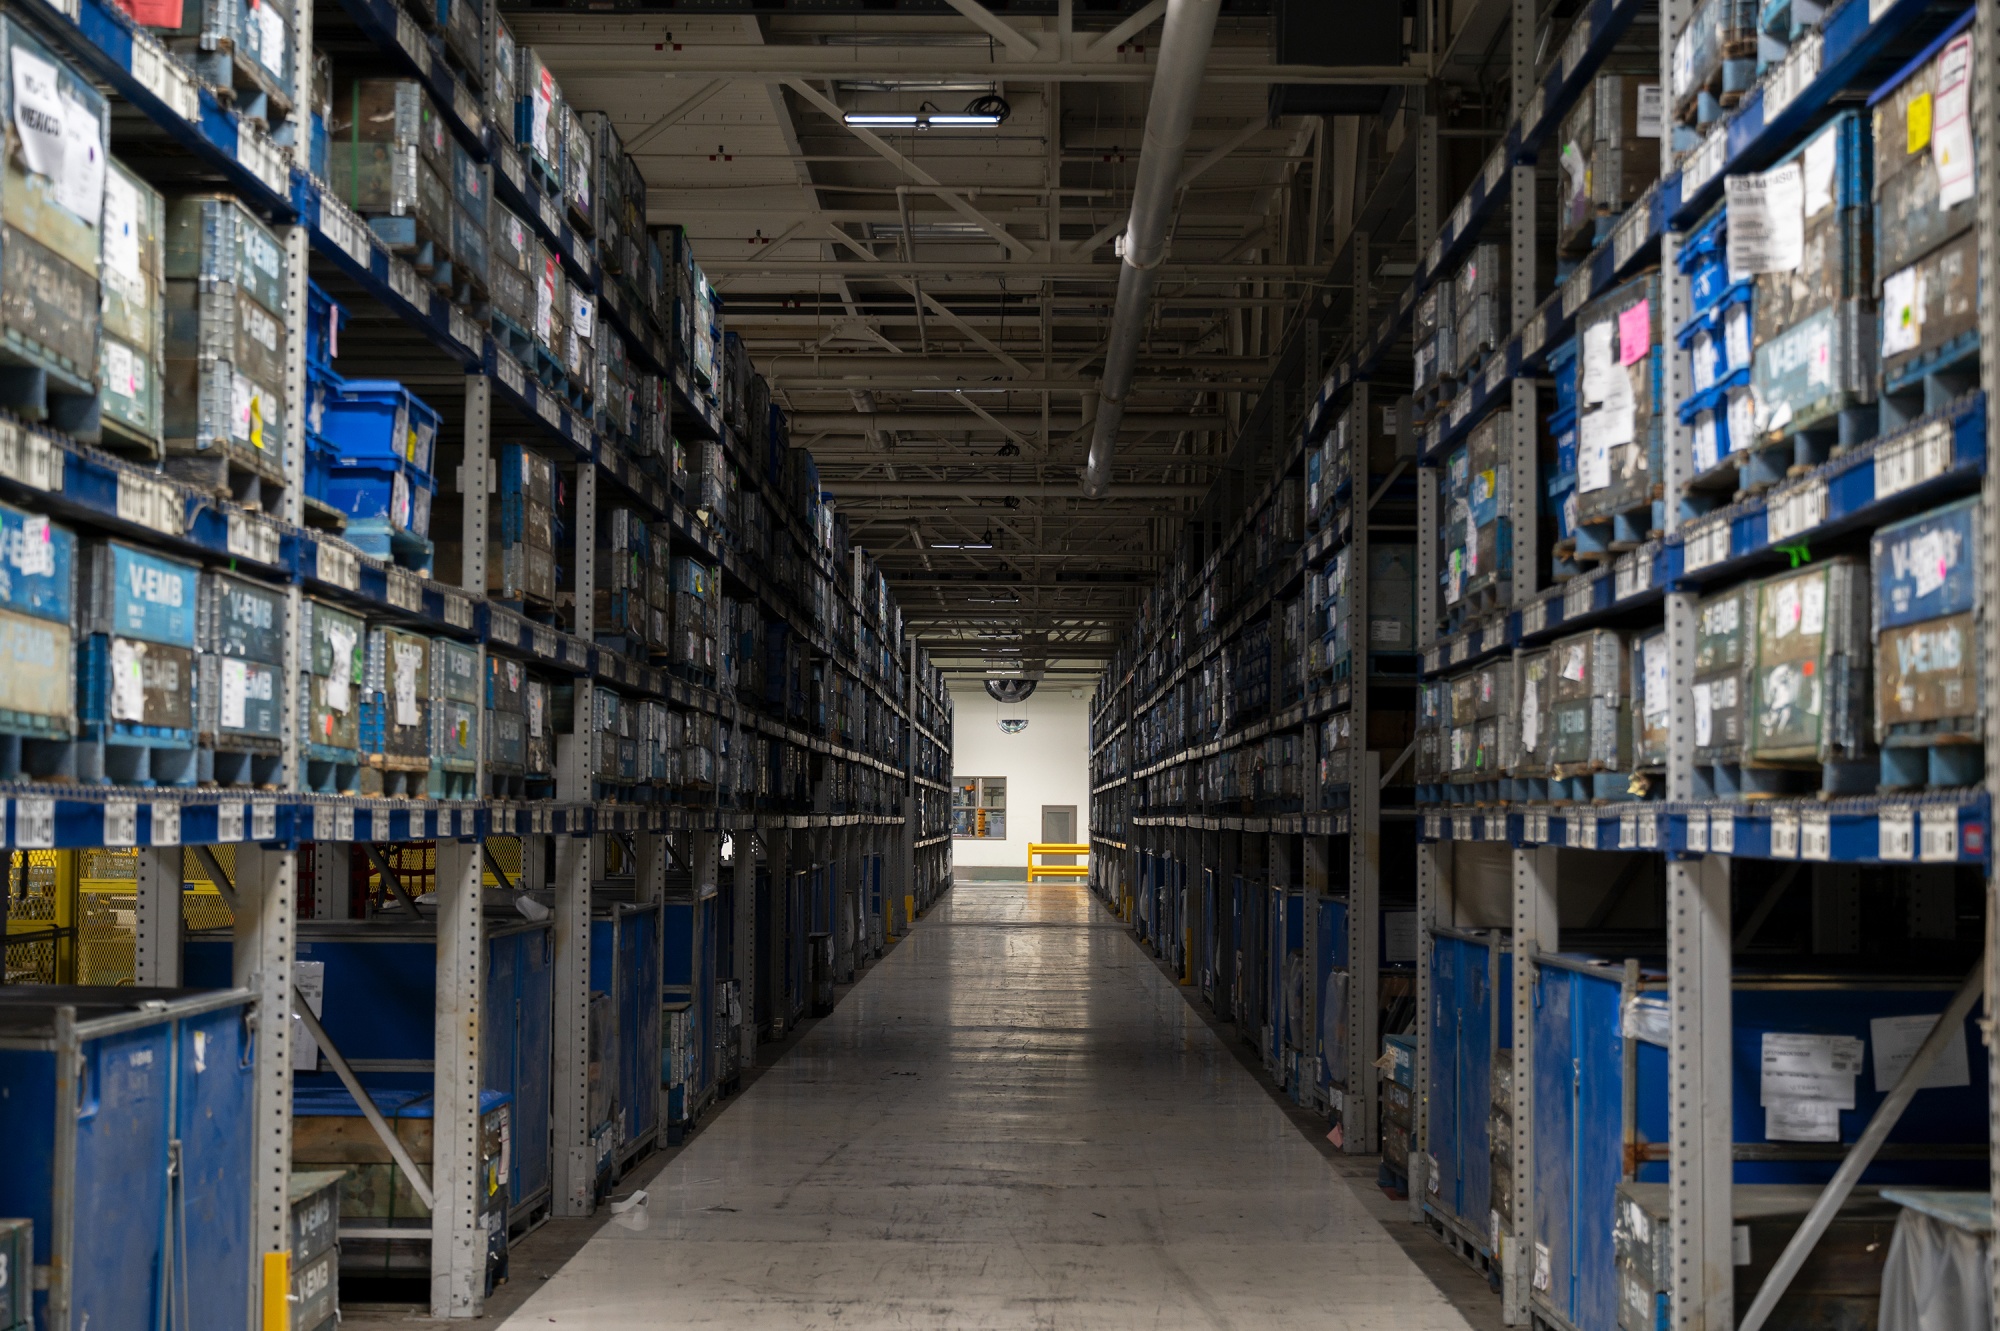 Warehouses still wanted! But investors take a breather